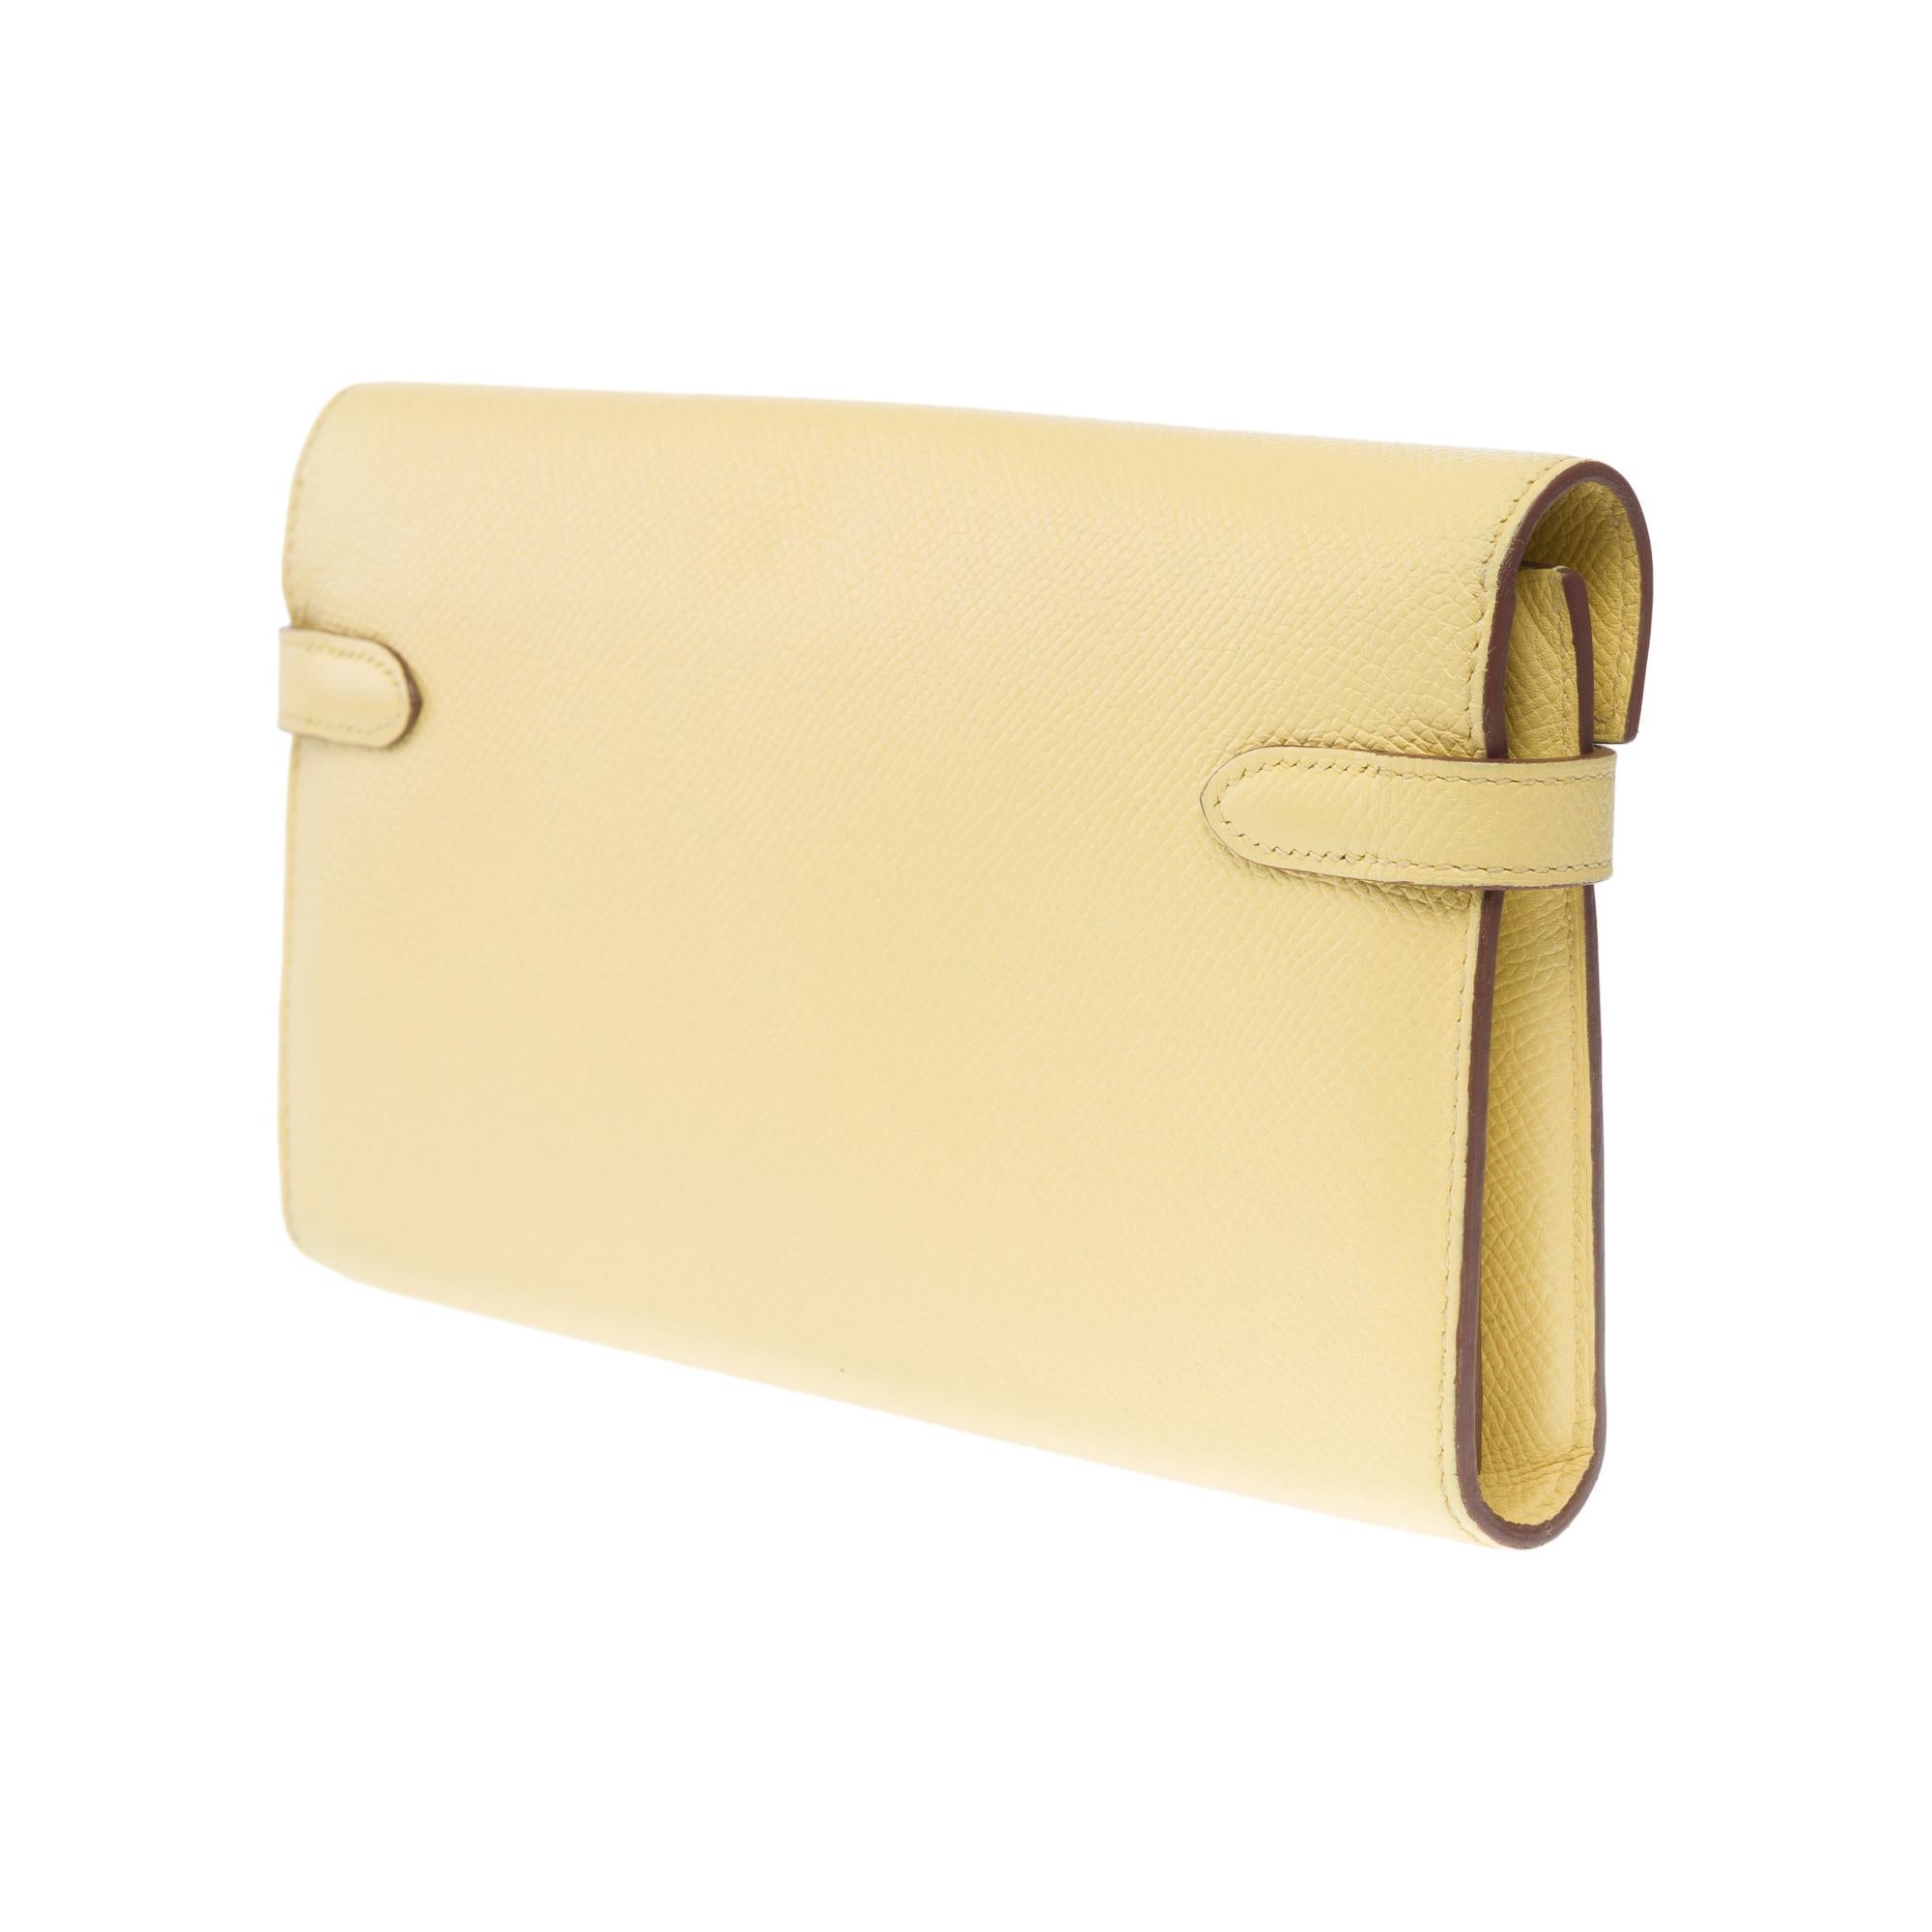 Beautiful Hermès Kelly Wallet in Yellow Poussin Epsom calf leather , GHW 1